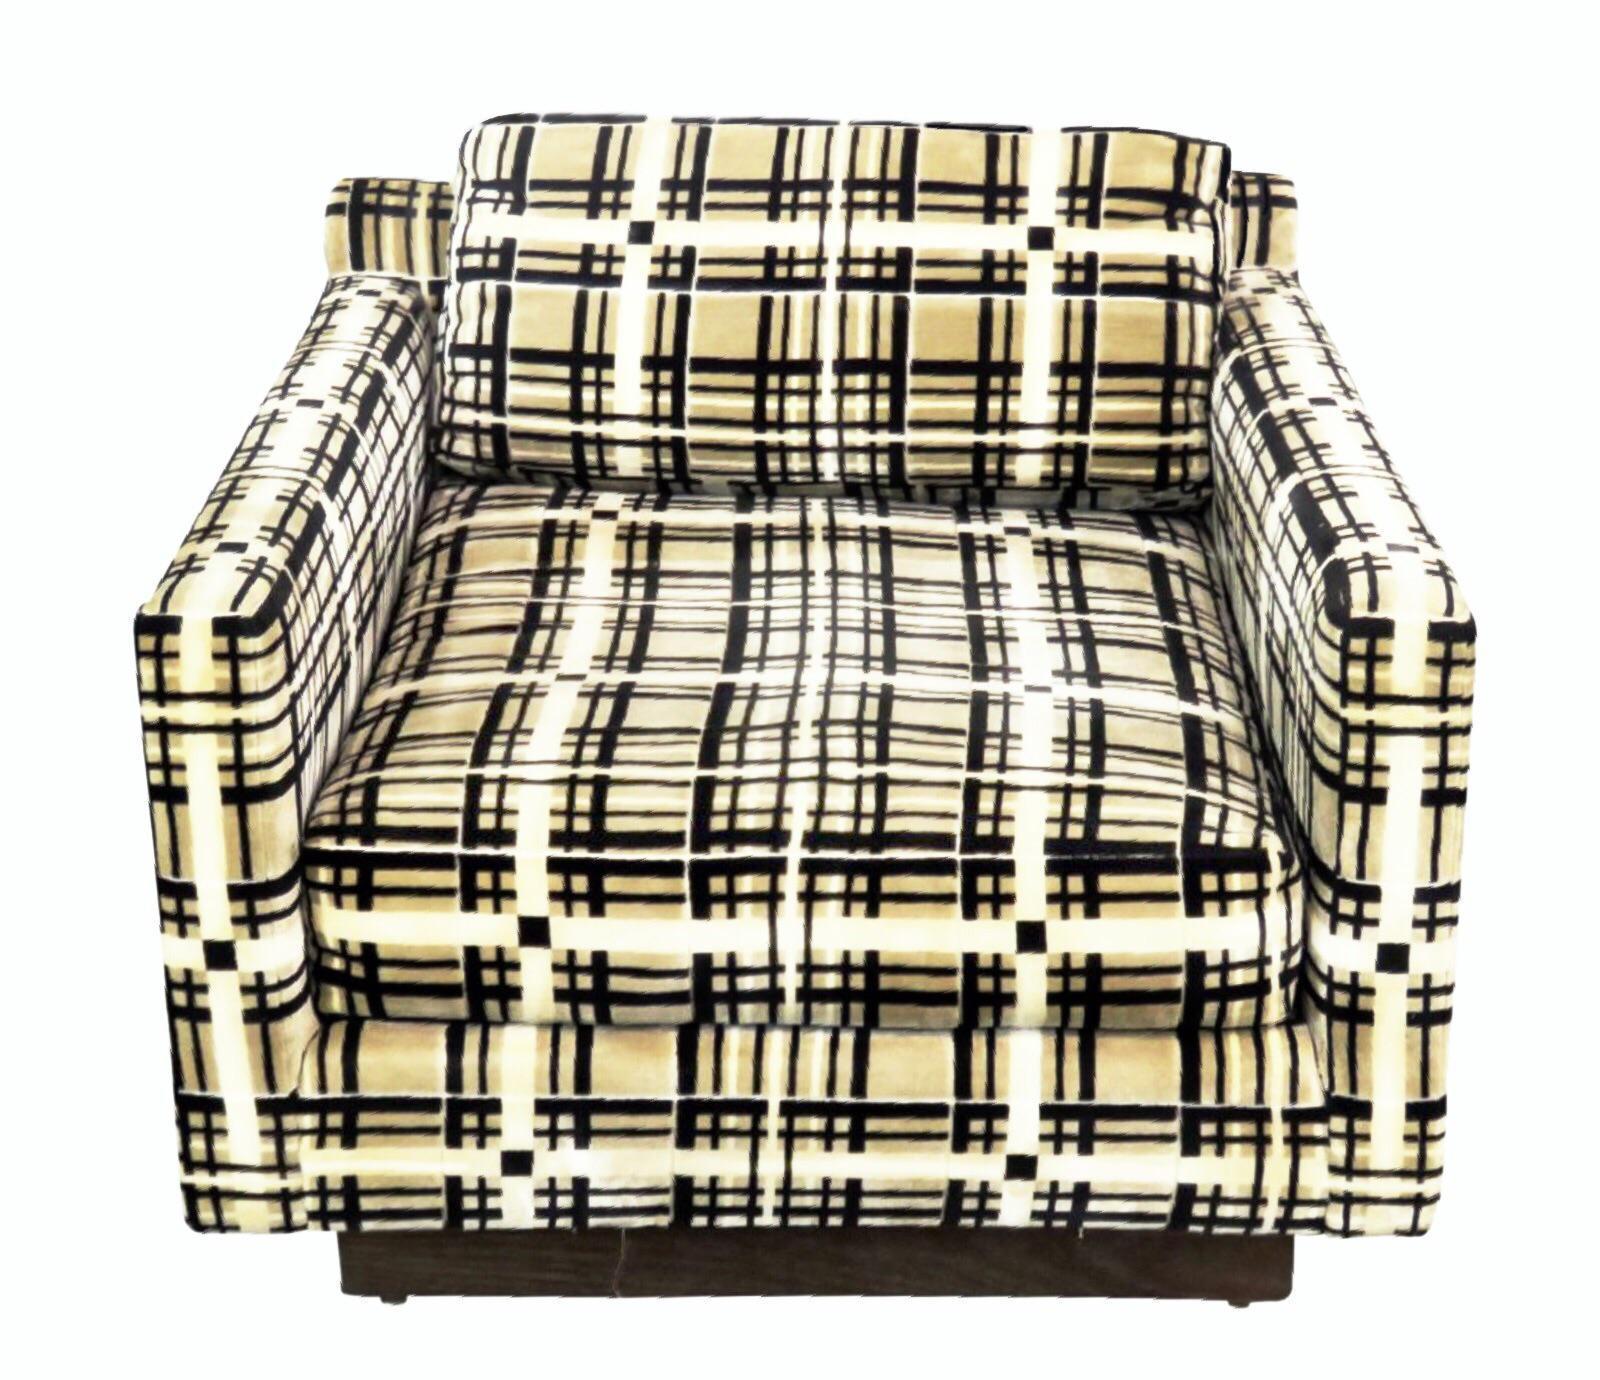 Gorgeous cube club chair by famed American manufacturer Armstrong furniture Co, midcentury production, circa 1960 in their now-shuttered Evansville factory. It's cubeness is accentuated by the linear pattern. Fun, vintage yet super versatile.